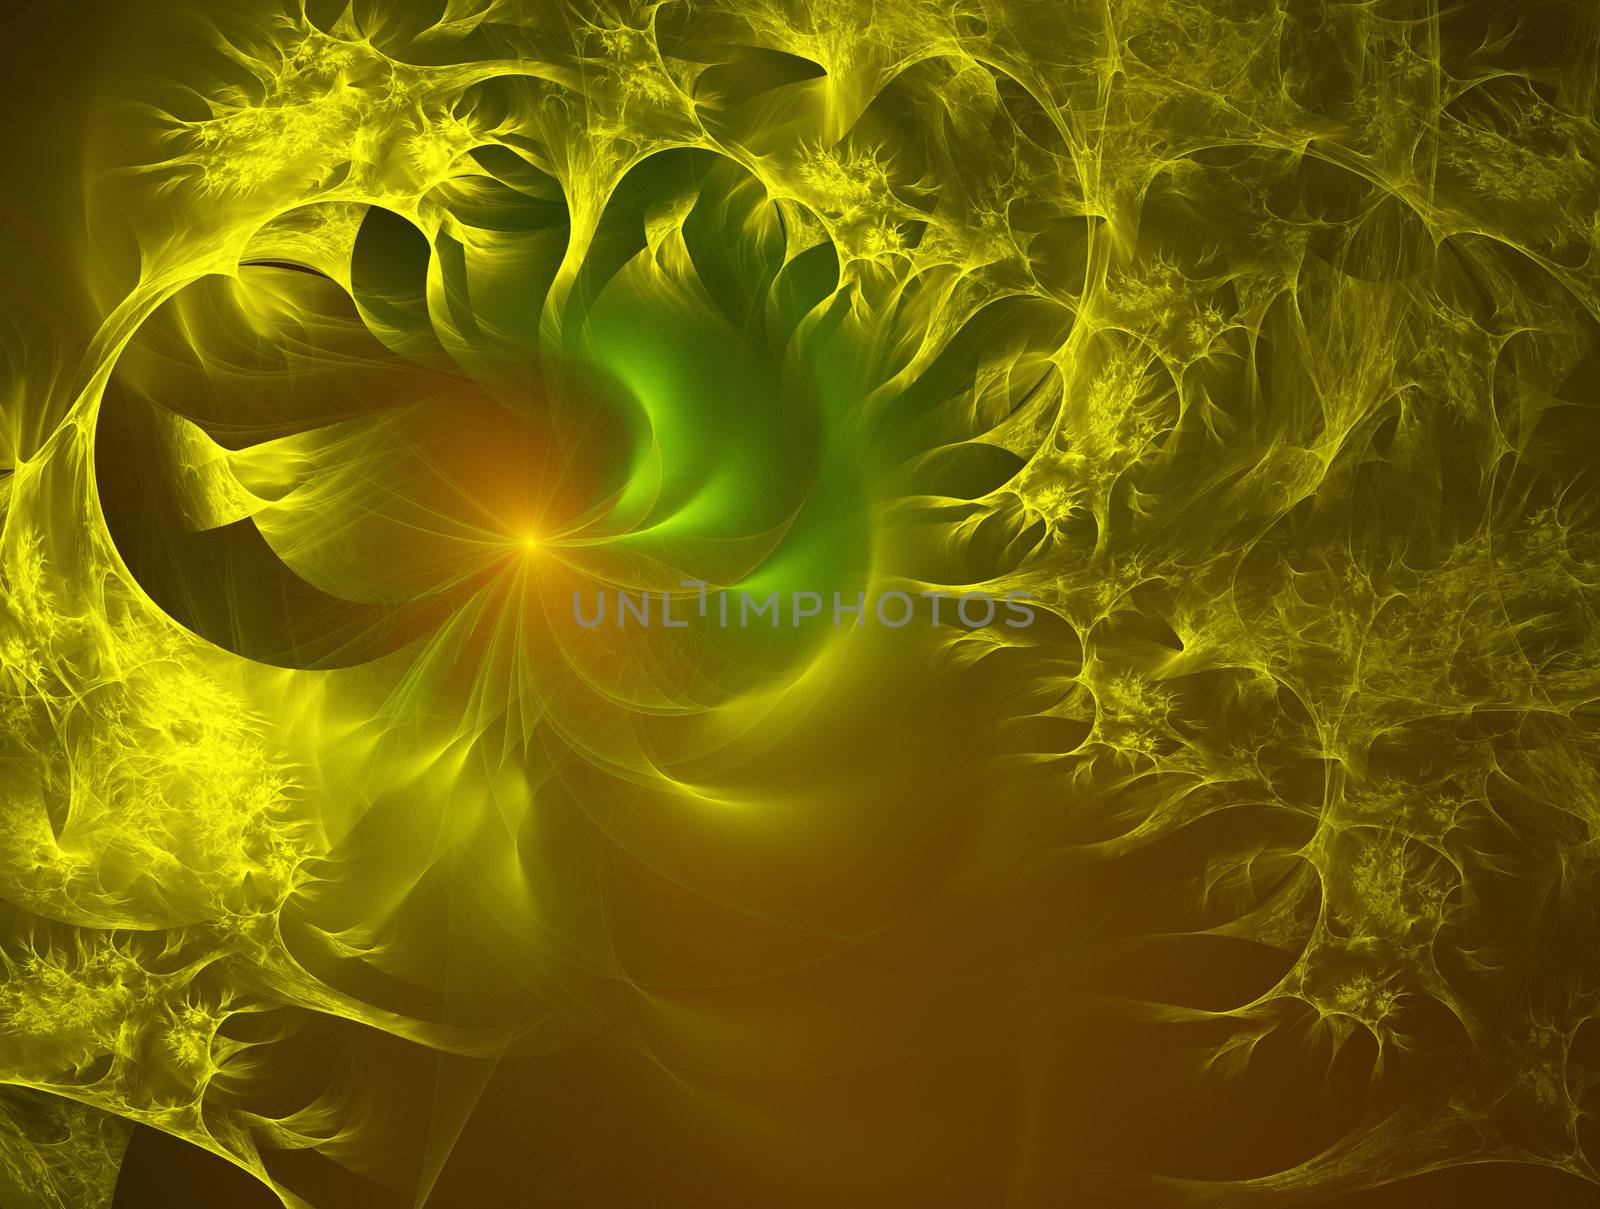 Gold Flame Around the Corona Fractal by watamyr